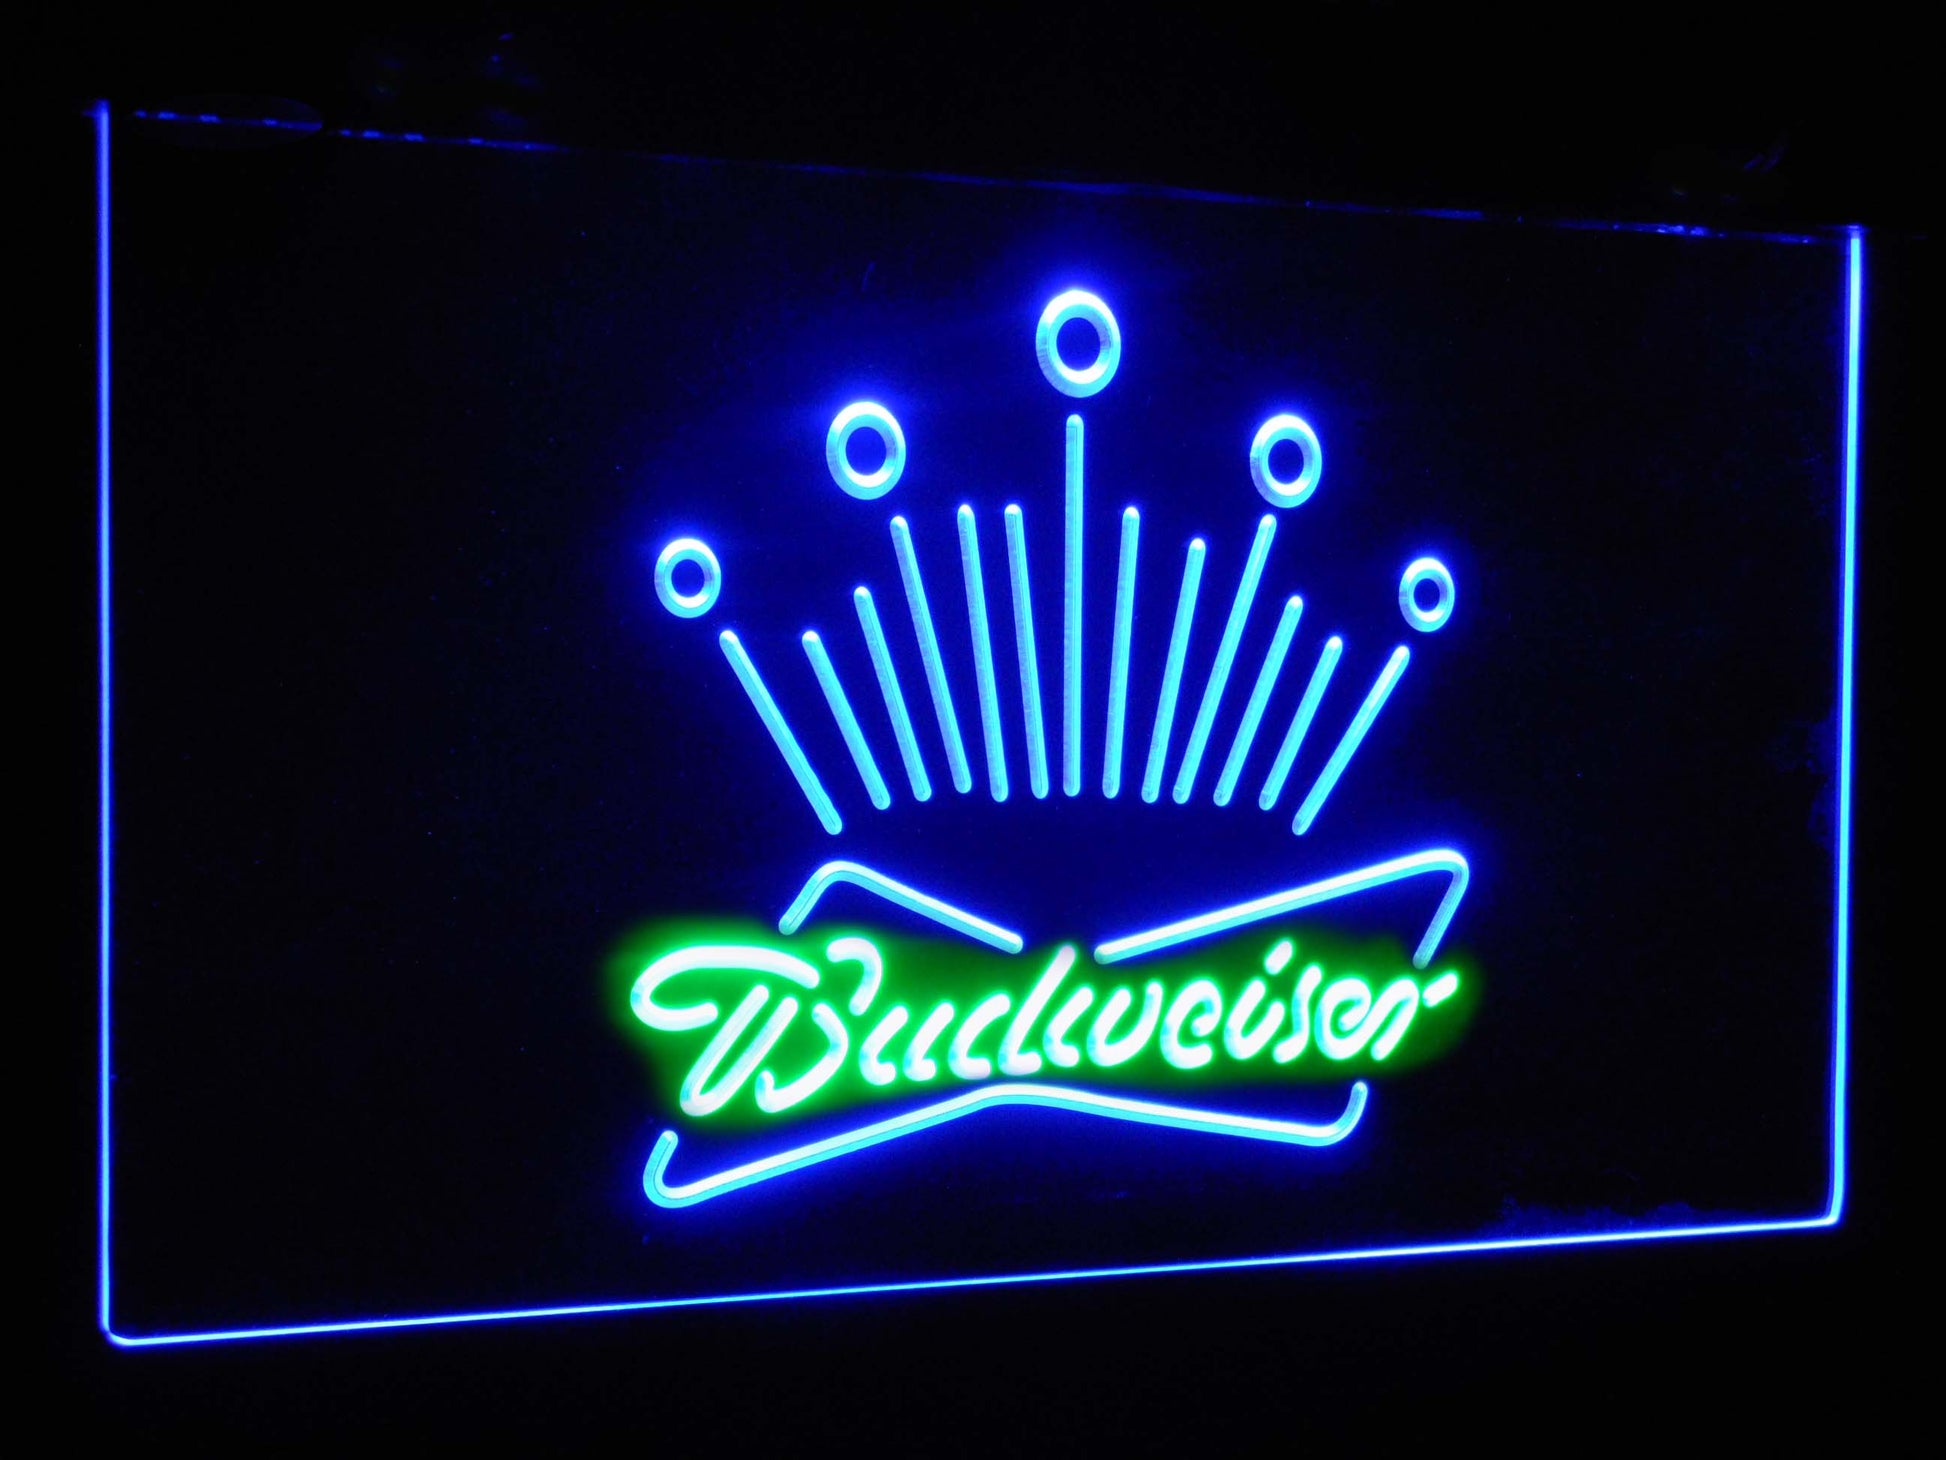 Budweiser Eagle  Club Bar Decoration Gift Dual Color Led Neon Light Signs st6-a2007 by Woody Signs Co. - Handmade Crafted Unique Wooden Creative